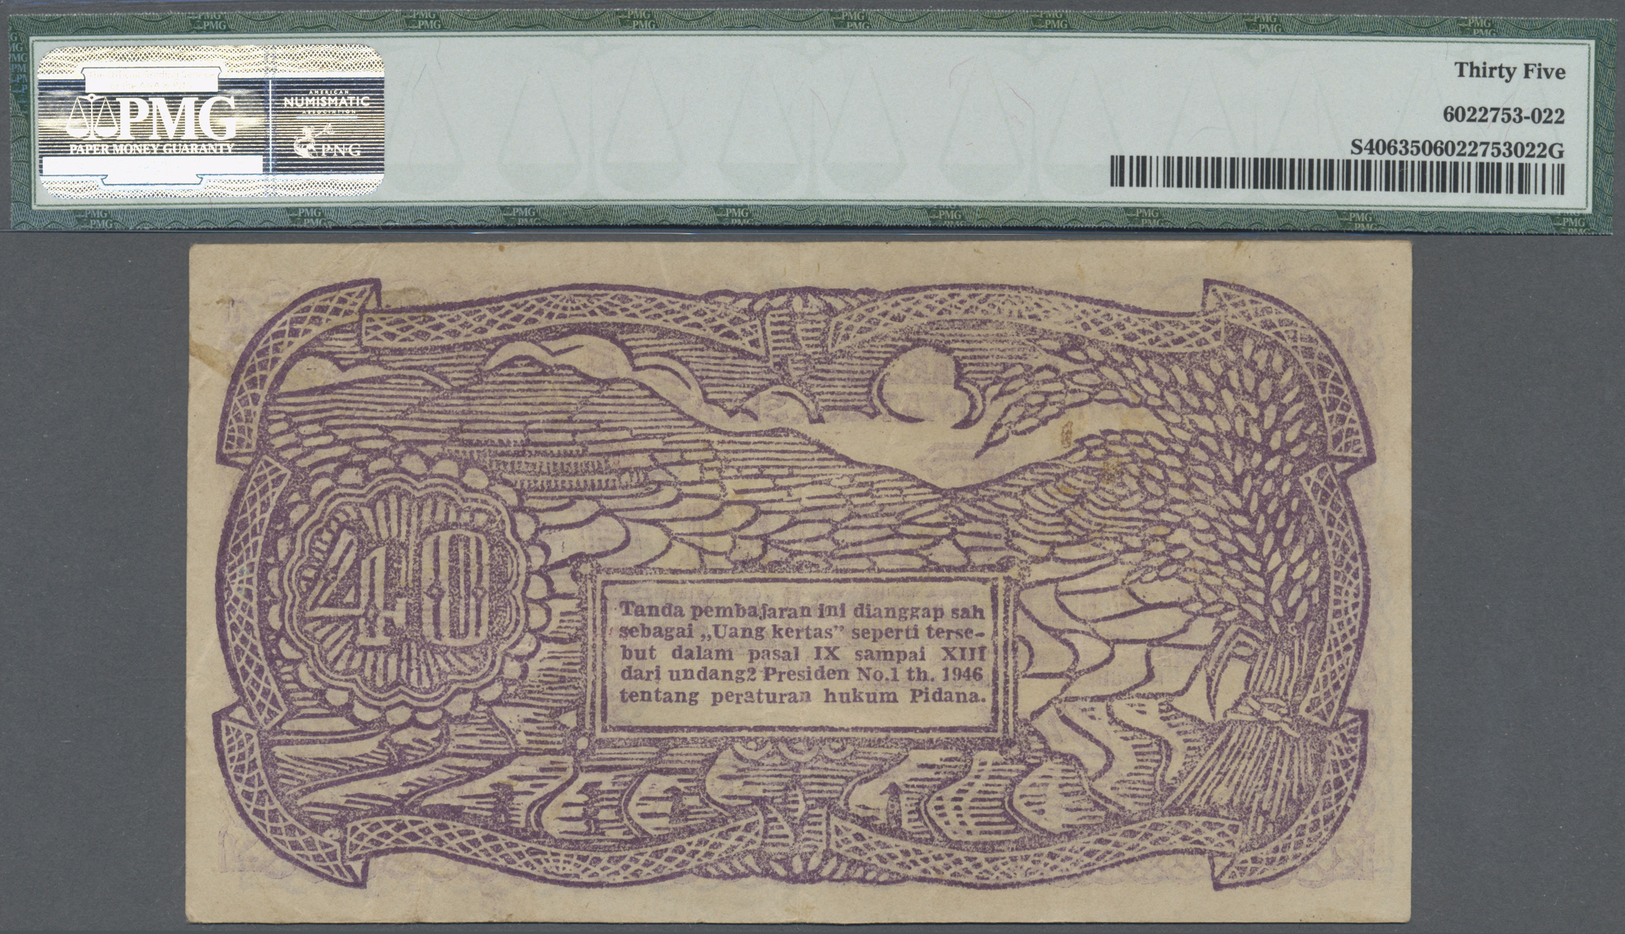 01211 Indonesia / Indonesien:  Treasury, Tjurup (South Sumata) 40 Rupiah 1949, P.S406, Nice Condition With Several Folds - Indonesia